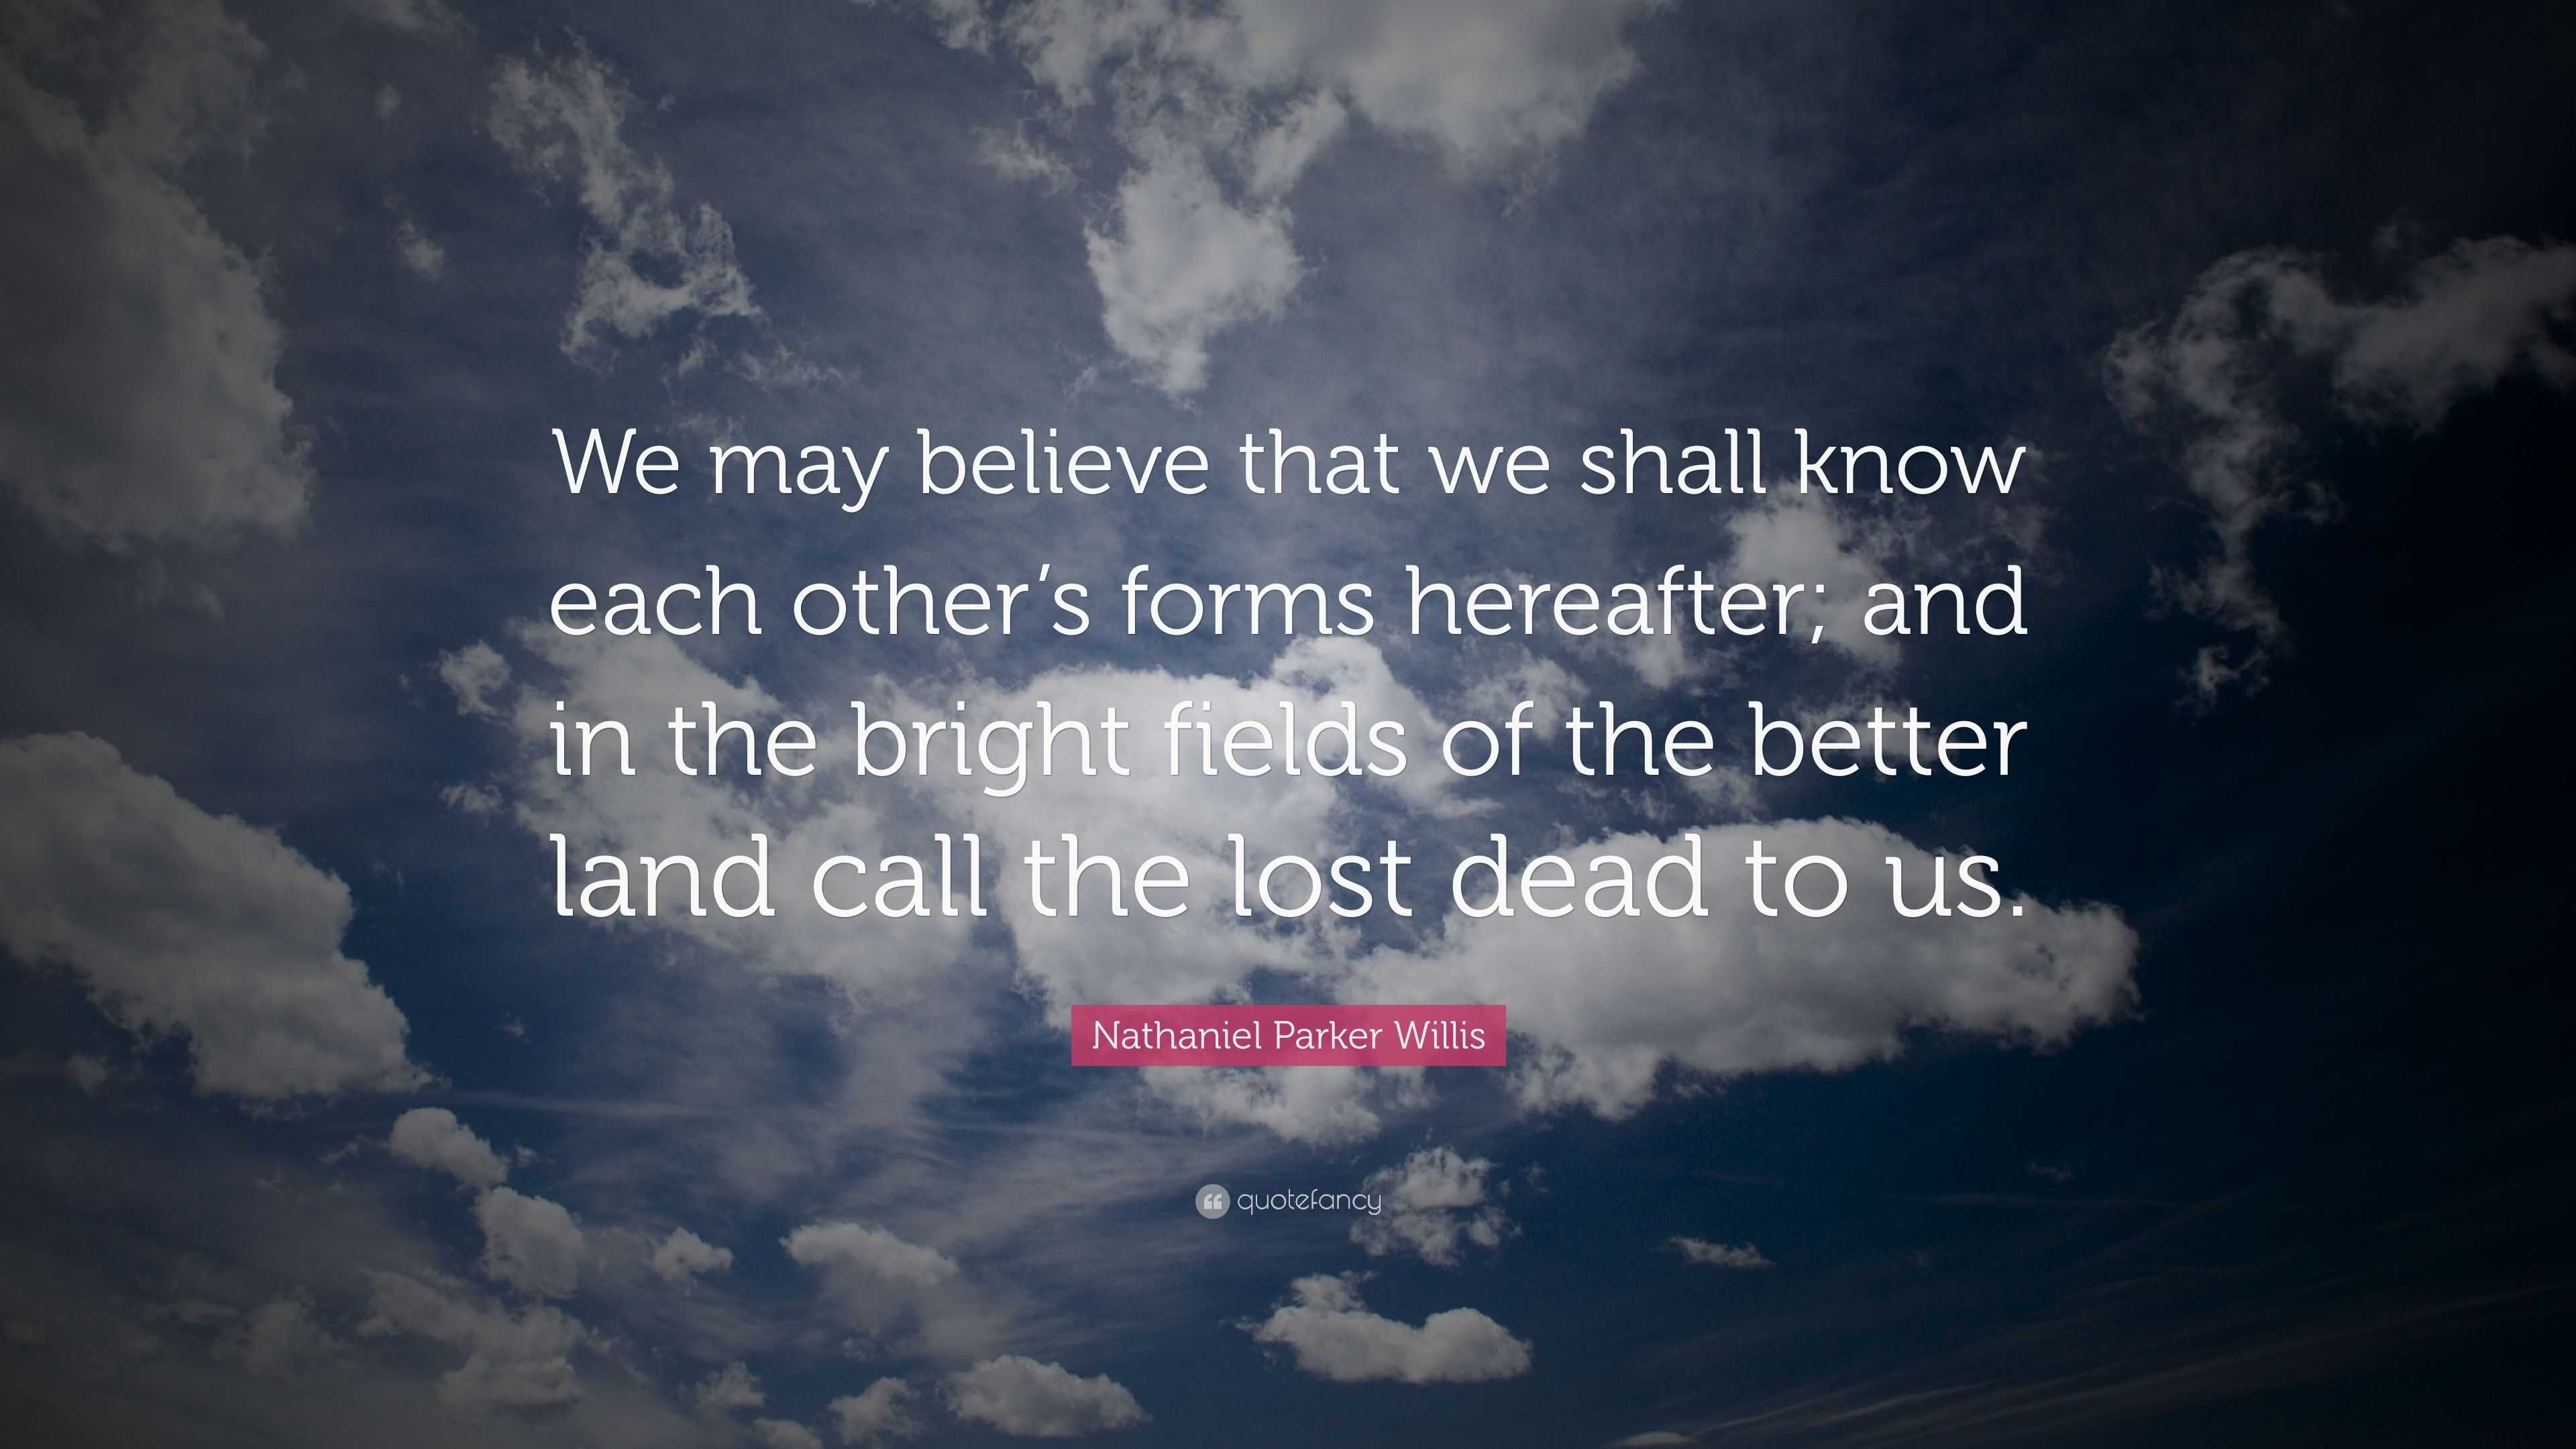 Nathaniel Parker Willis Quote: “We may believe that we shall know each ...